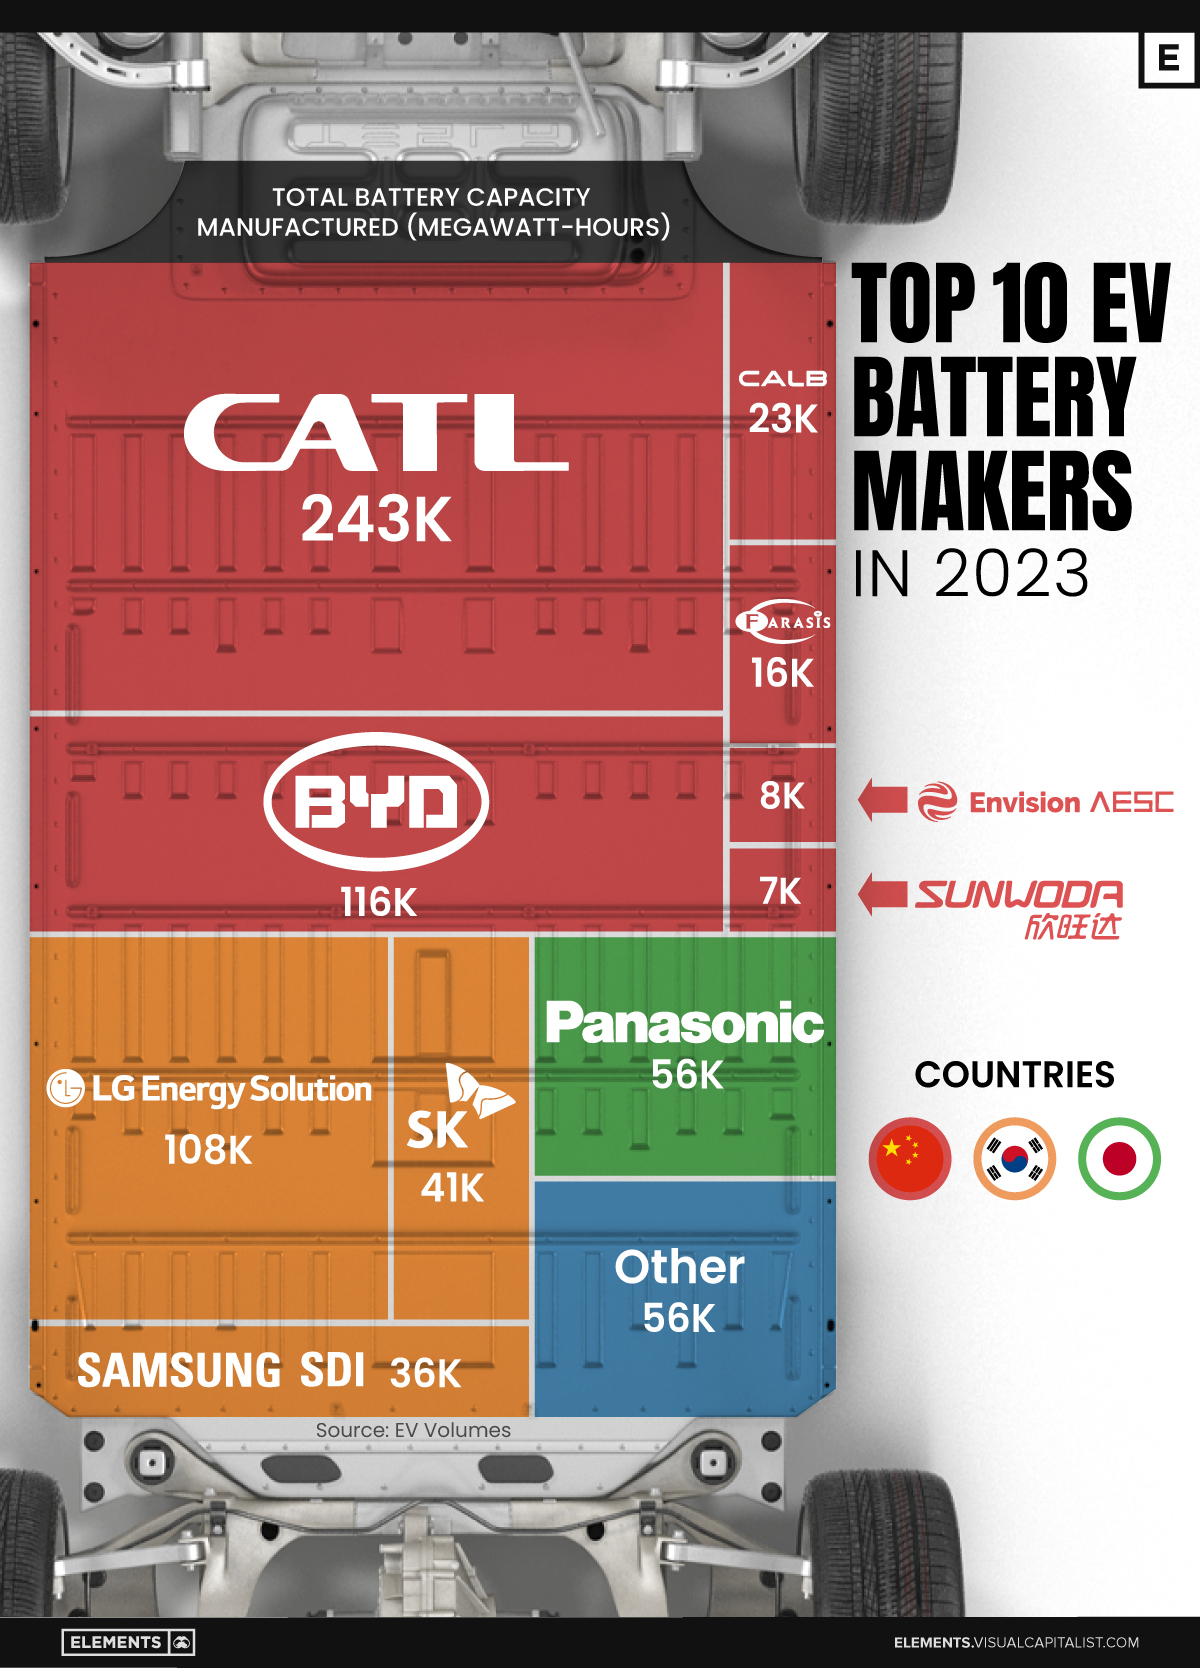 A treemap showing the top 10 EV battery manufacturers in 2023.